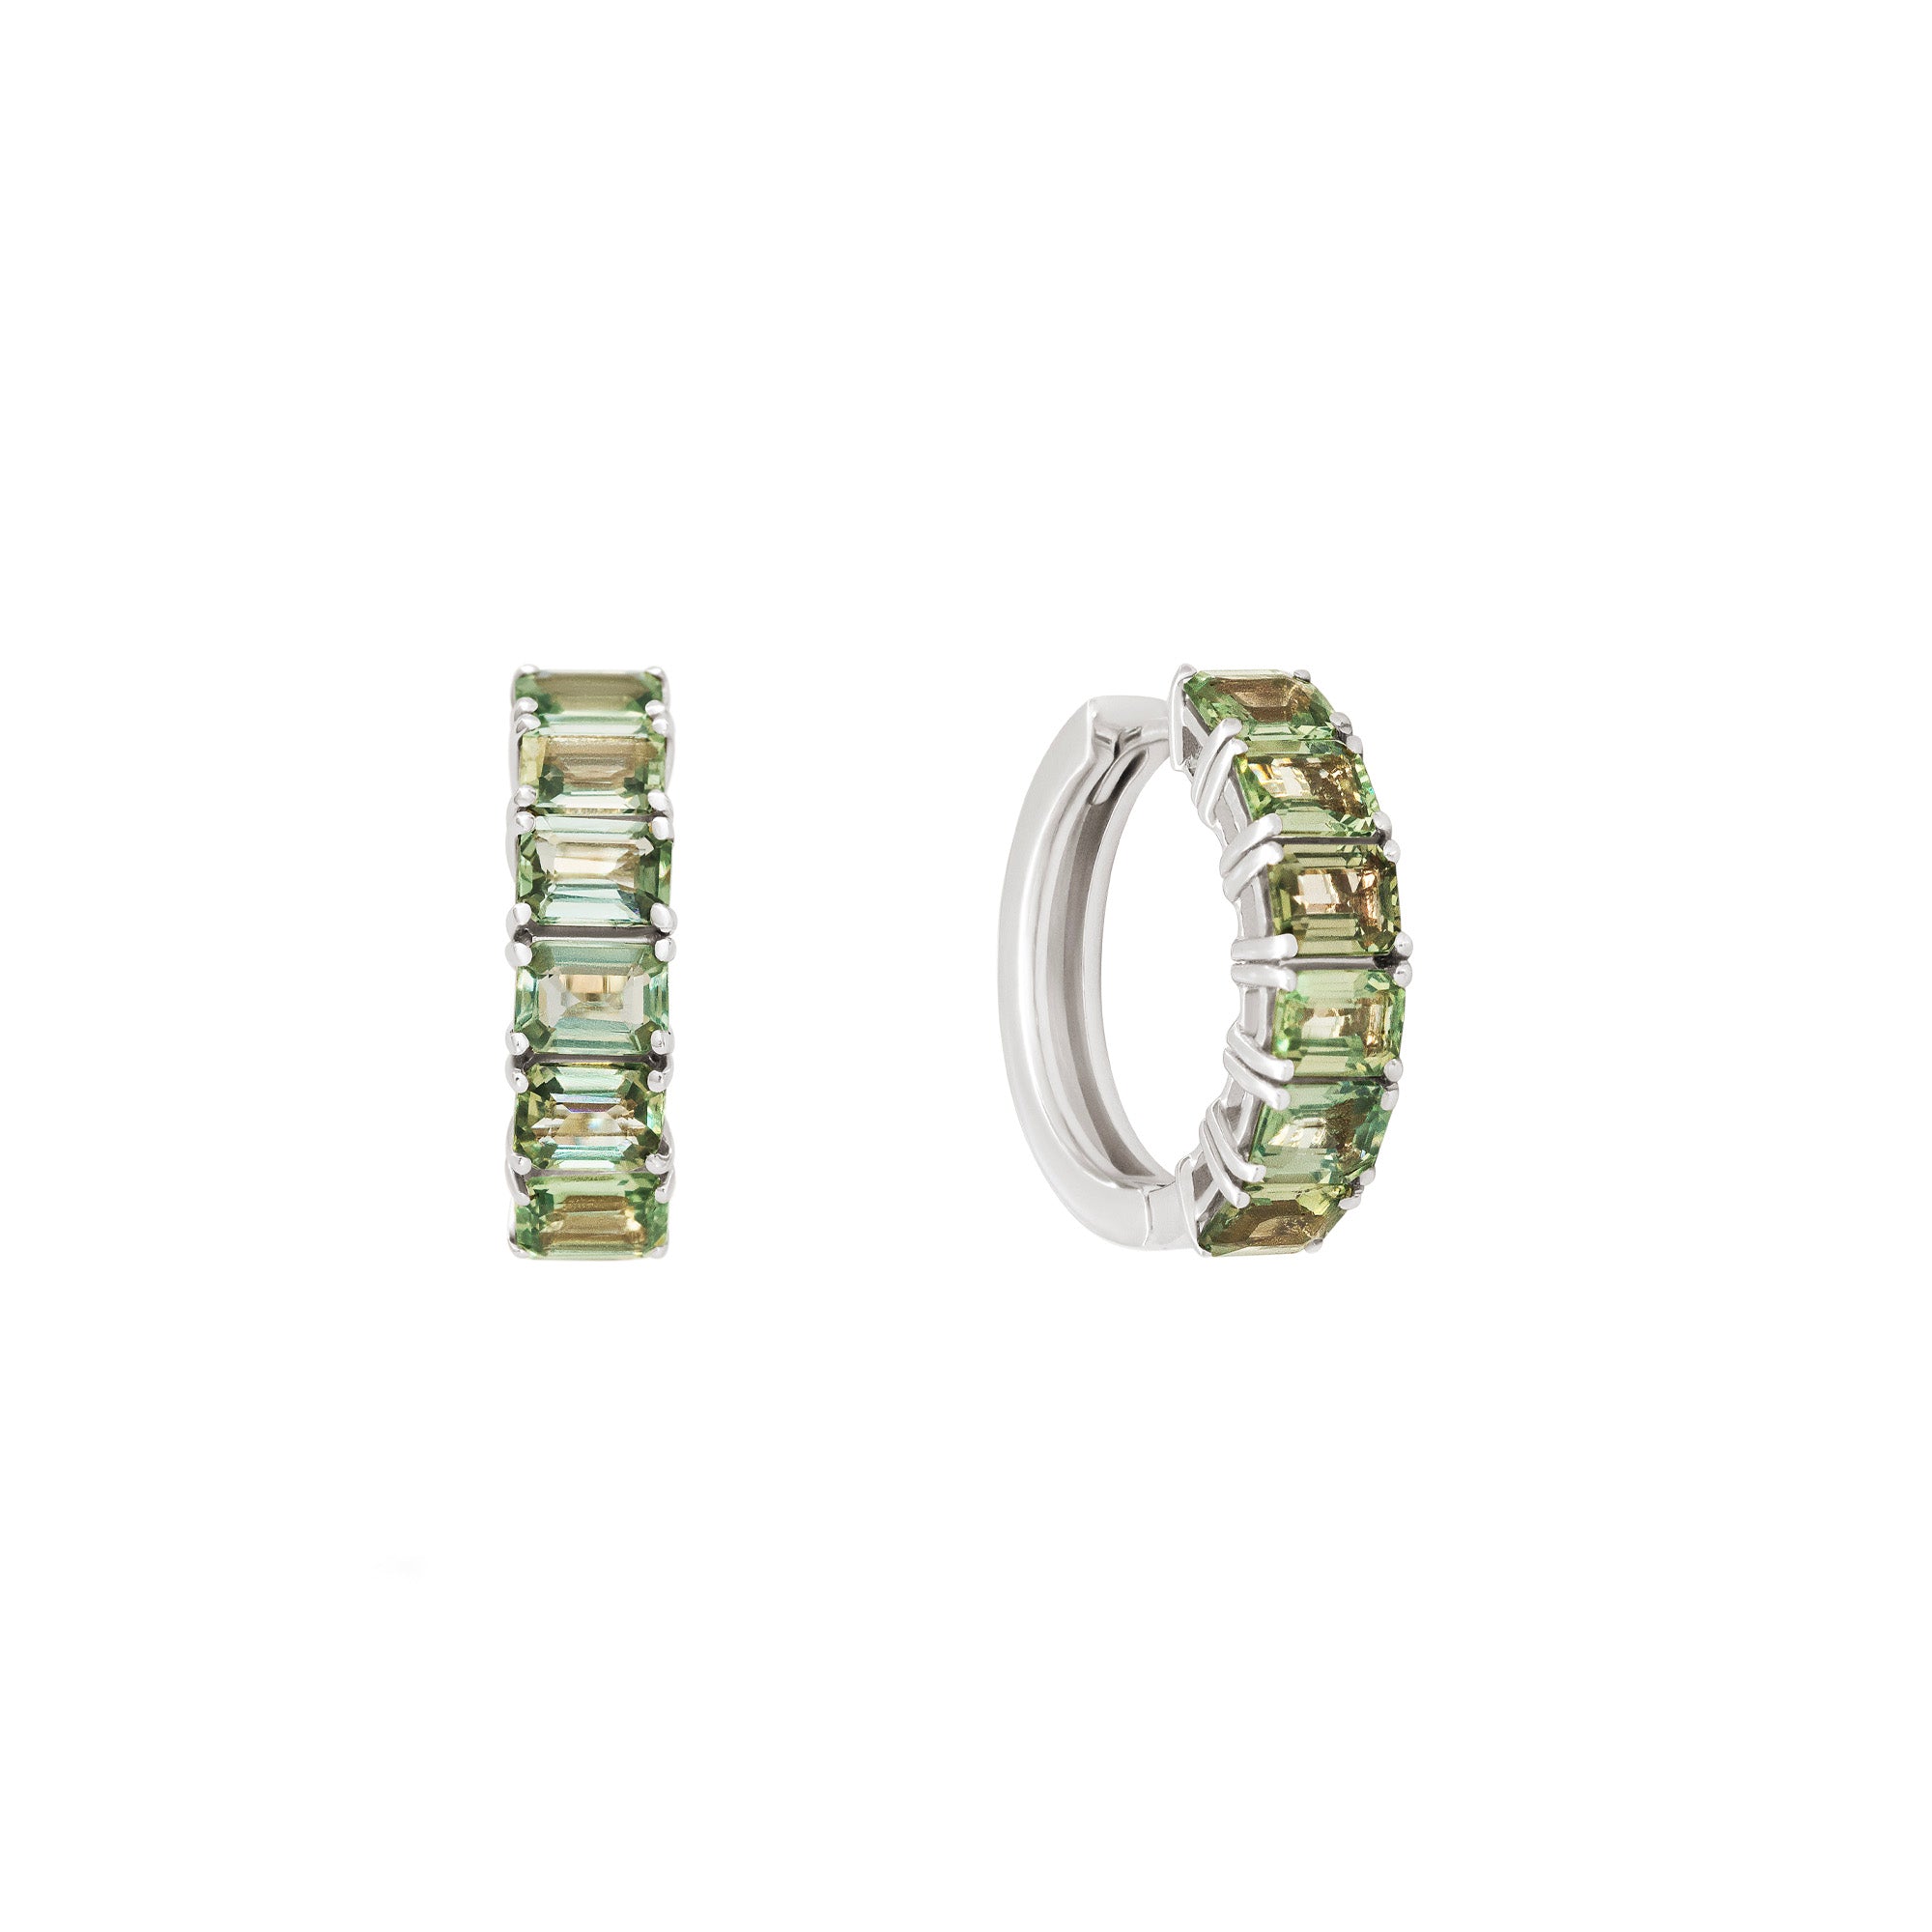 Pace White Gold Earrings With Green Sapphires